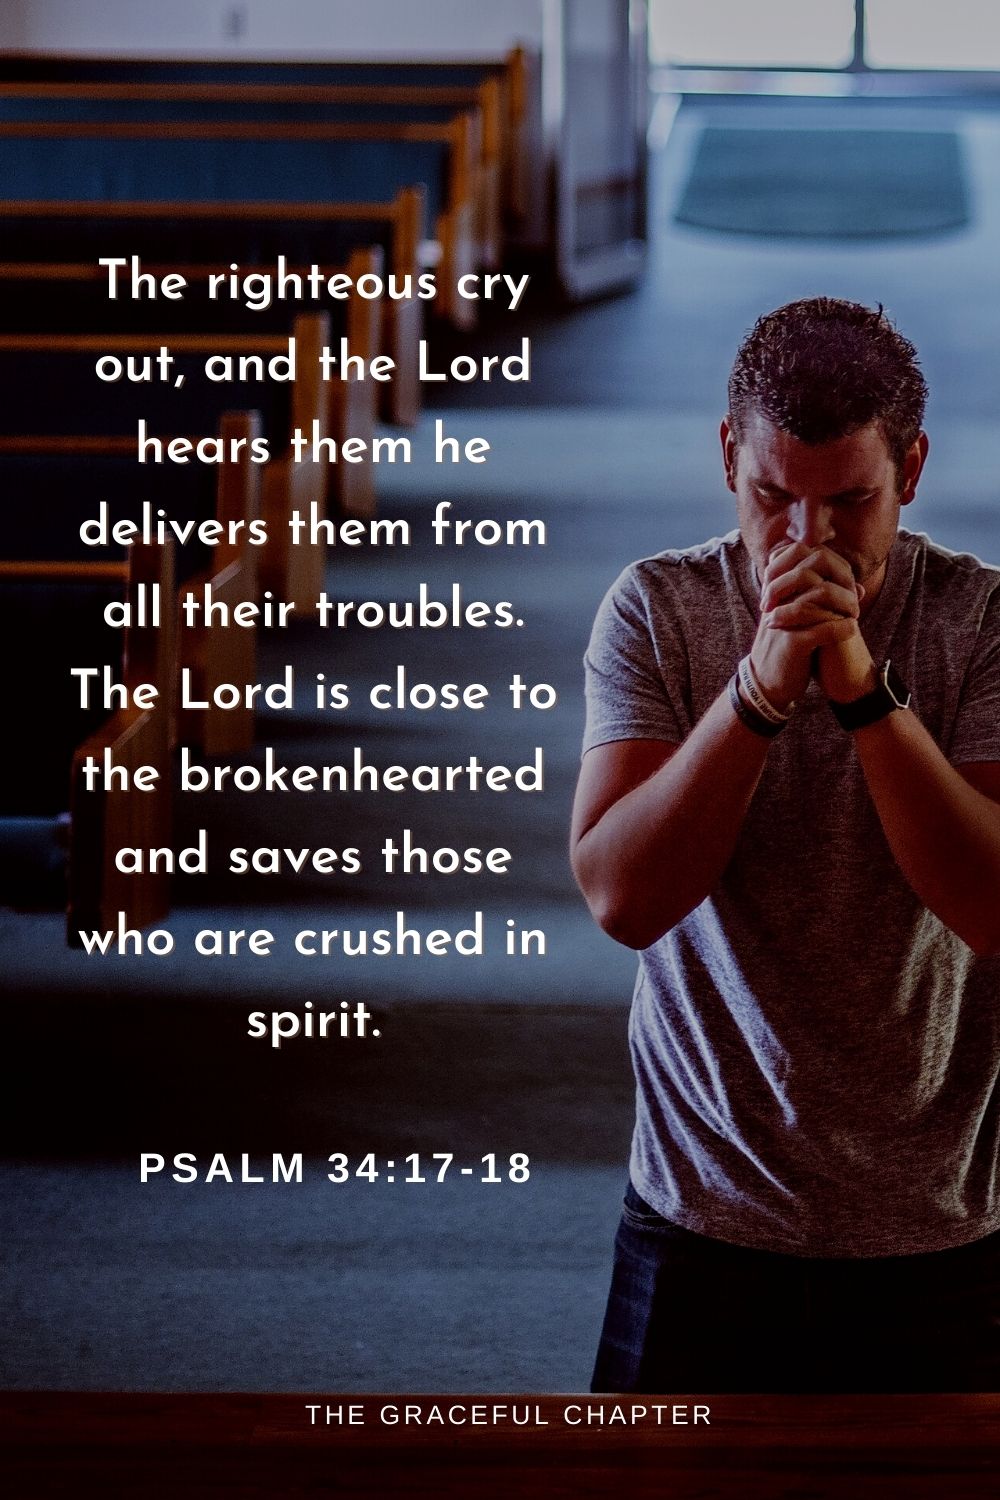 The righteous cry out, and the Lord hears them                                                            he delivers them from all their troubles. The Lord is close to the brokenhearted and saves those who are crushed in spirit.